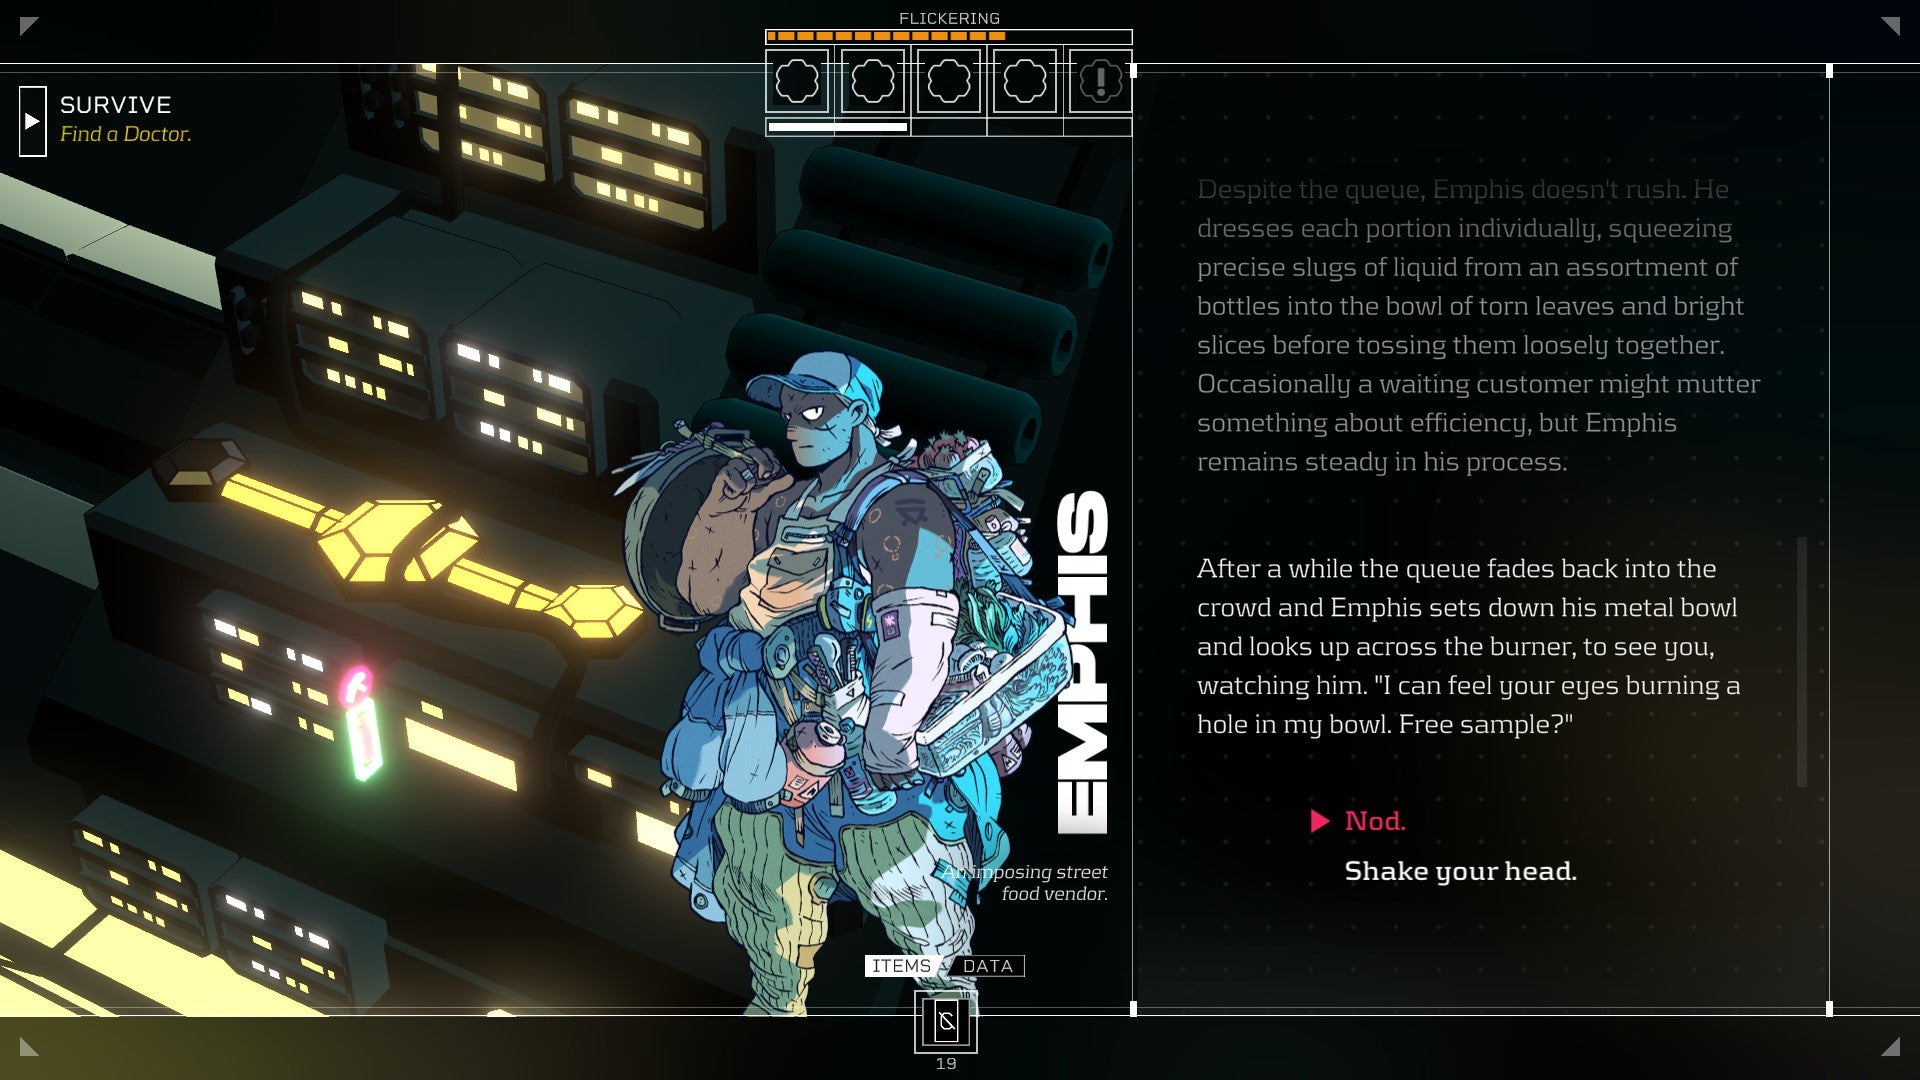 Citizen Sleeper review - dialogue with a chef called Emphis, character art of a large man on the left, dialogue on the right as he offers you a free sample of food.